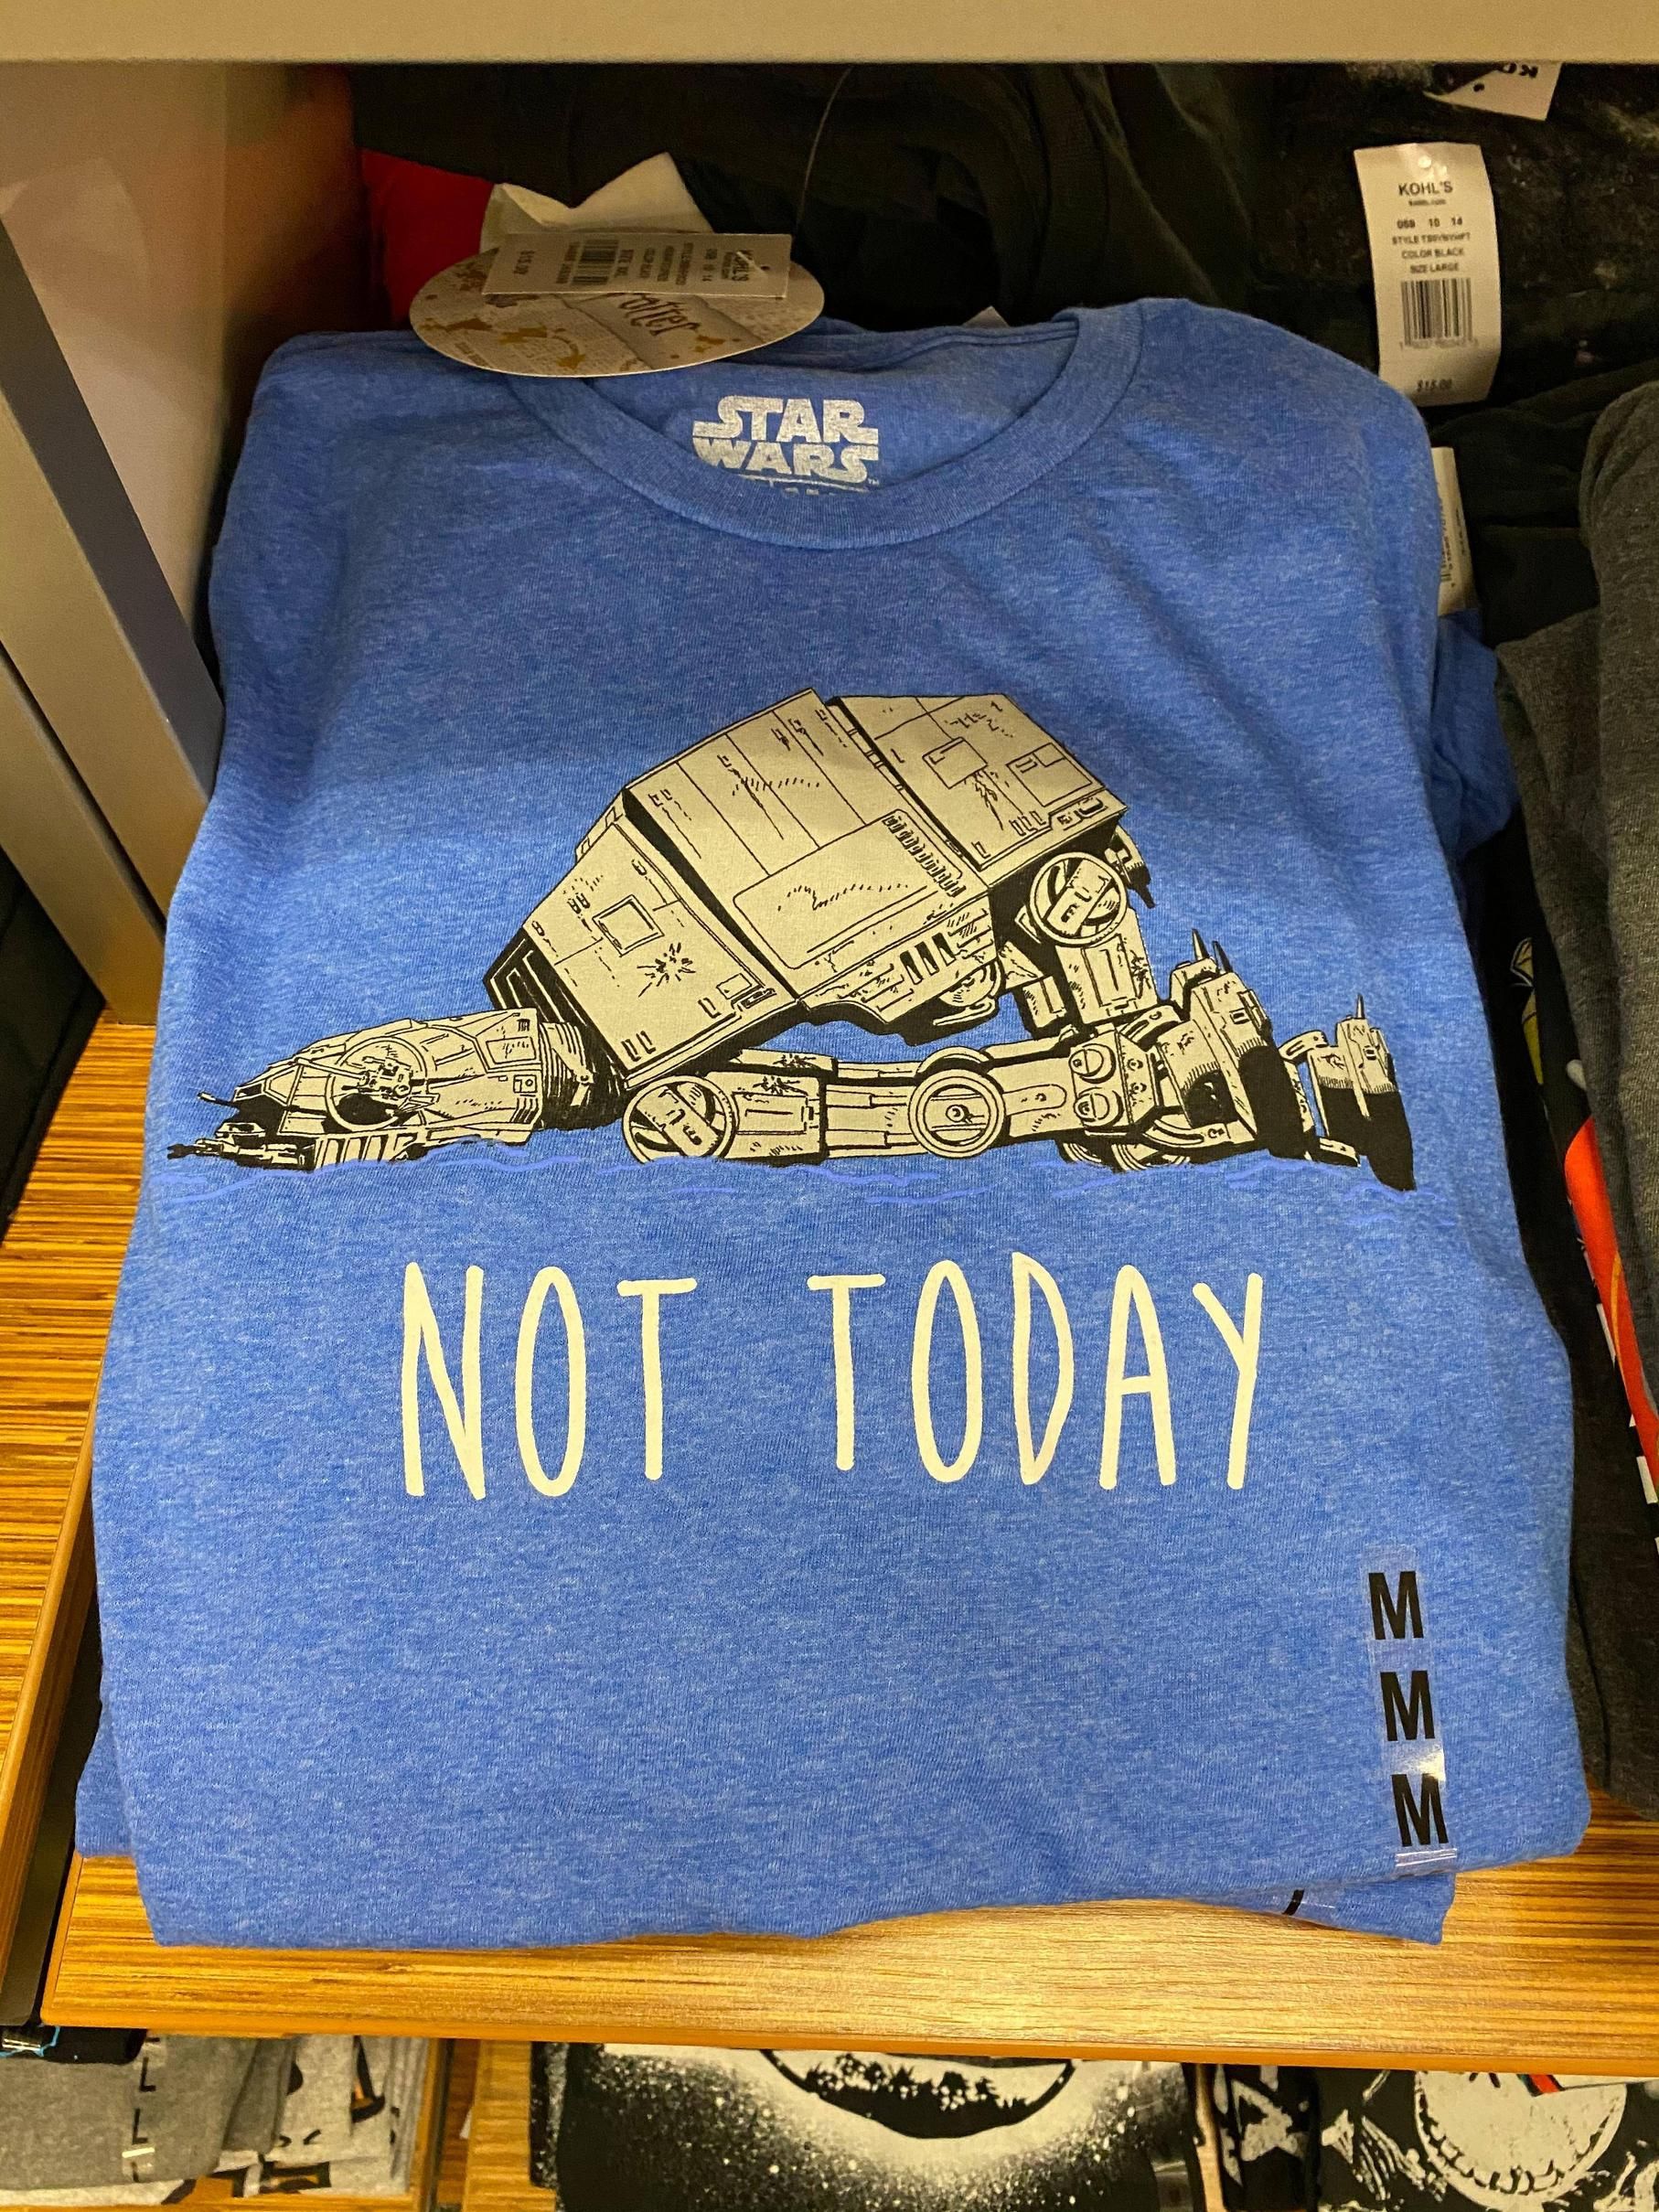 Was shopping for some new shirts and found my overall mood.